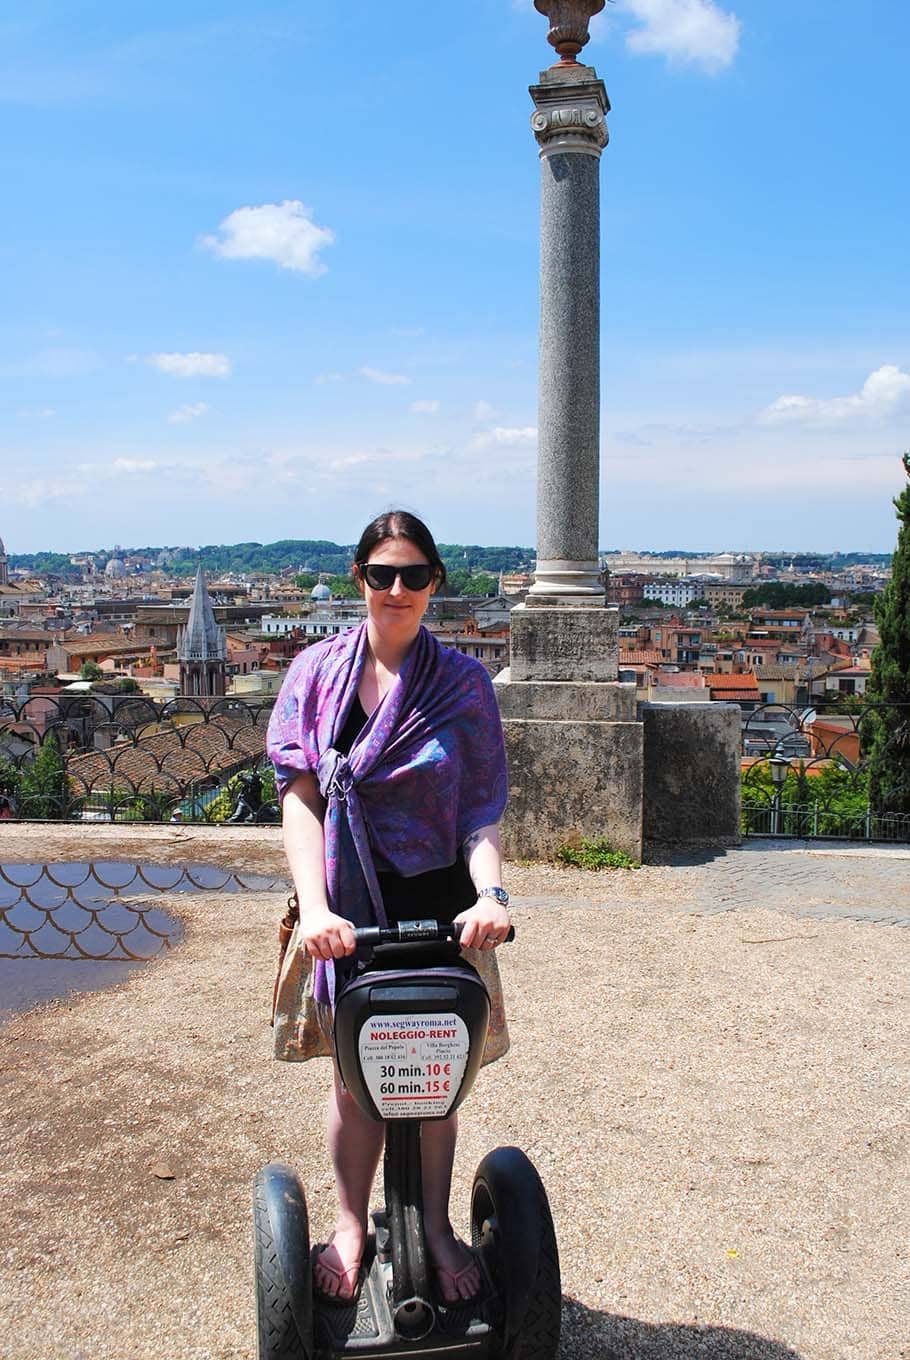 A woman riding a Segway with a city skyline in the background.